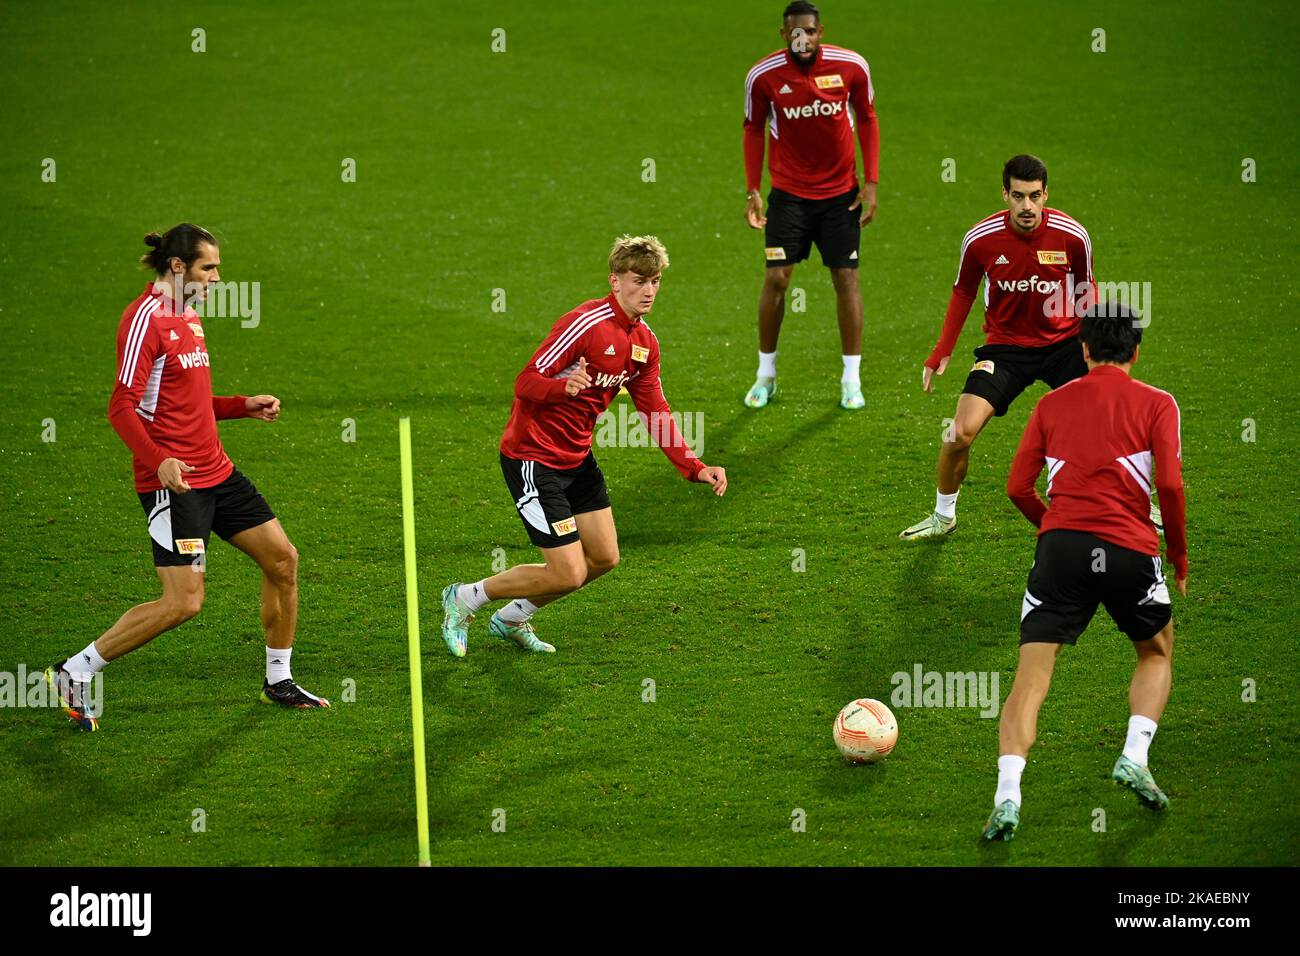 Berlin's Christopher Trimmel, Berlin's Aljoscha Kemlein, Berlin's Diogo Leite, Berlin's Jordan Pefok and Berlin's Genki Haraguchi fight for the ball during a training session of German soccer team Union Berlin, Wednesday 02 November 2022 in Heverlee, in preparation of tomorrow's game against Belgian soccer team Royale Union Saint-Gilloise on day 6/6 of the Uefa Europa League group stage. BELGA PHOTO JOHN THYS Stock Photo